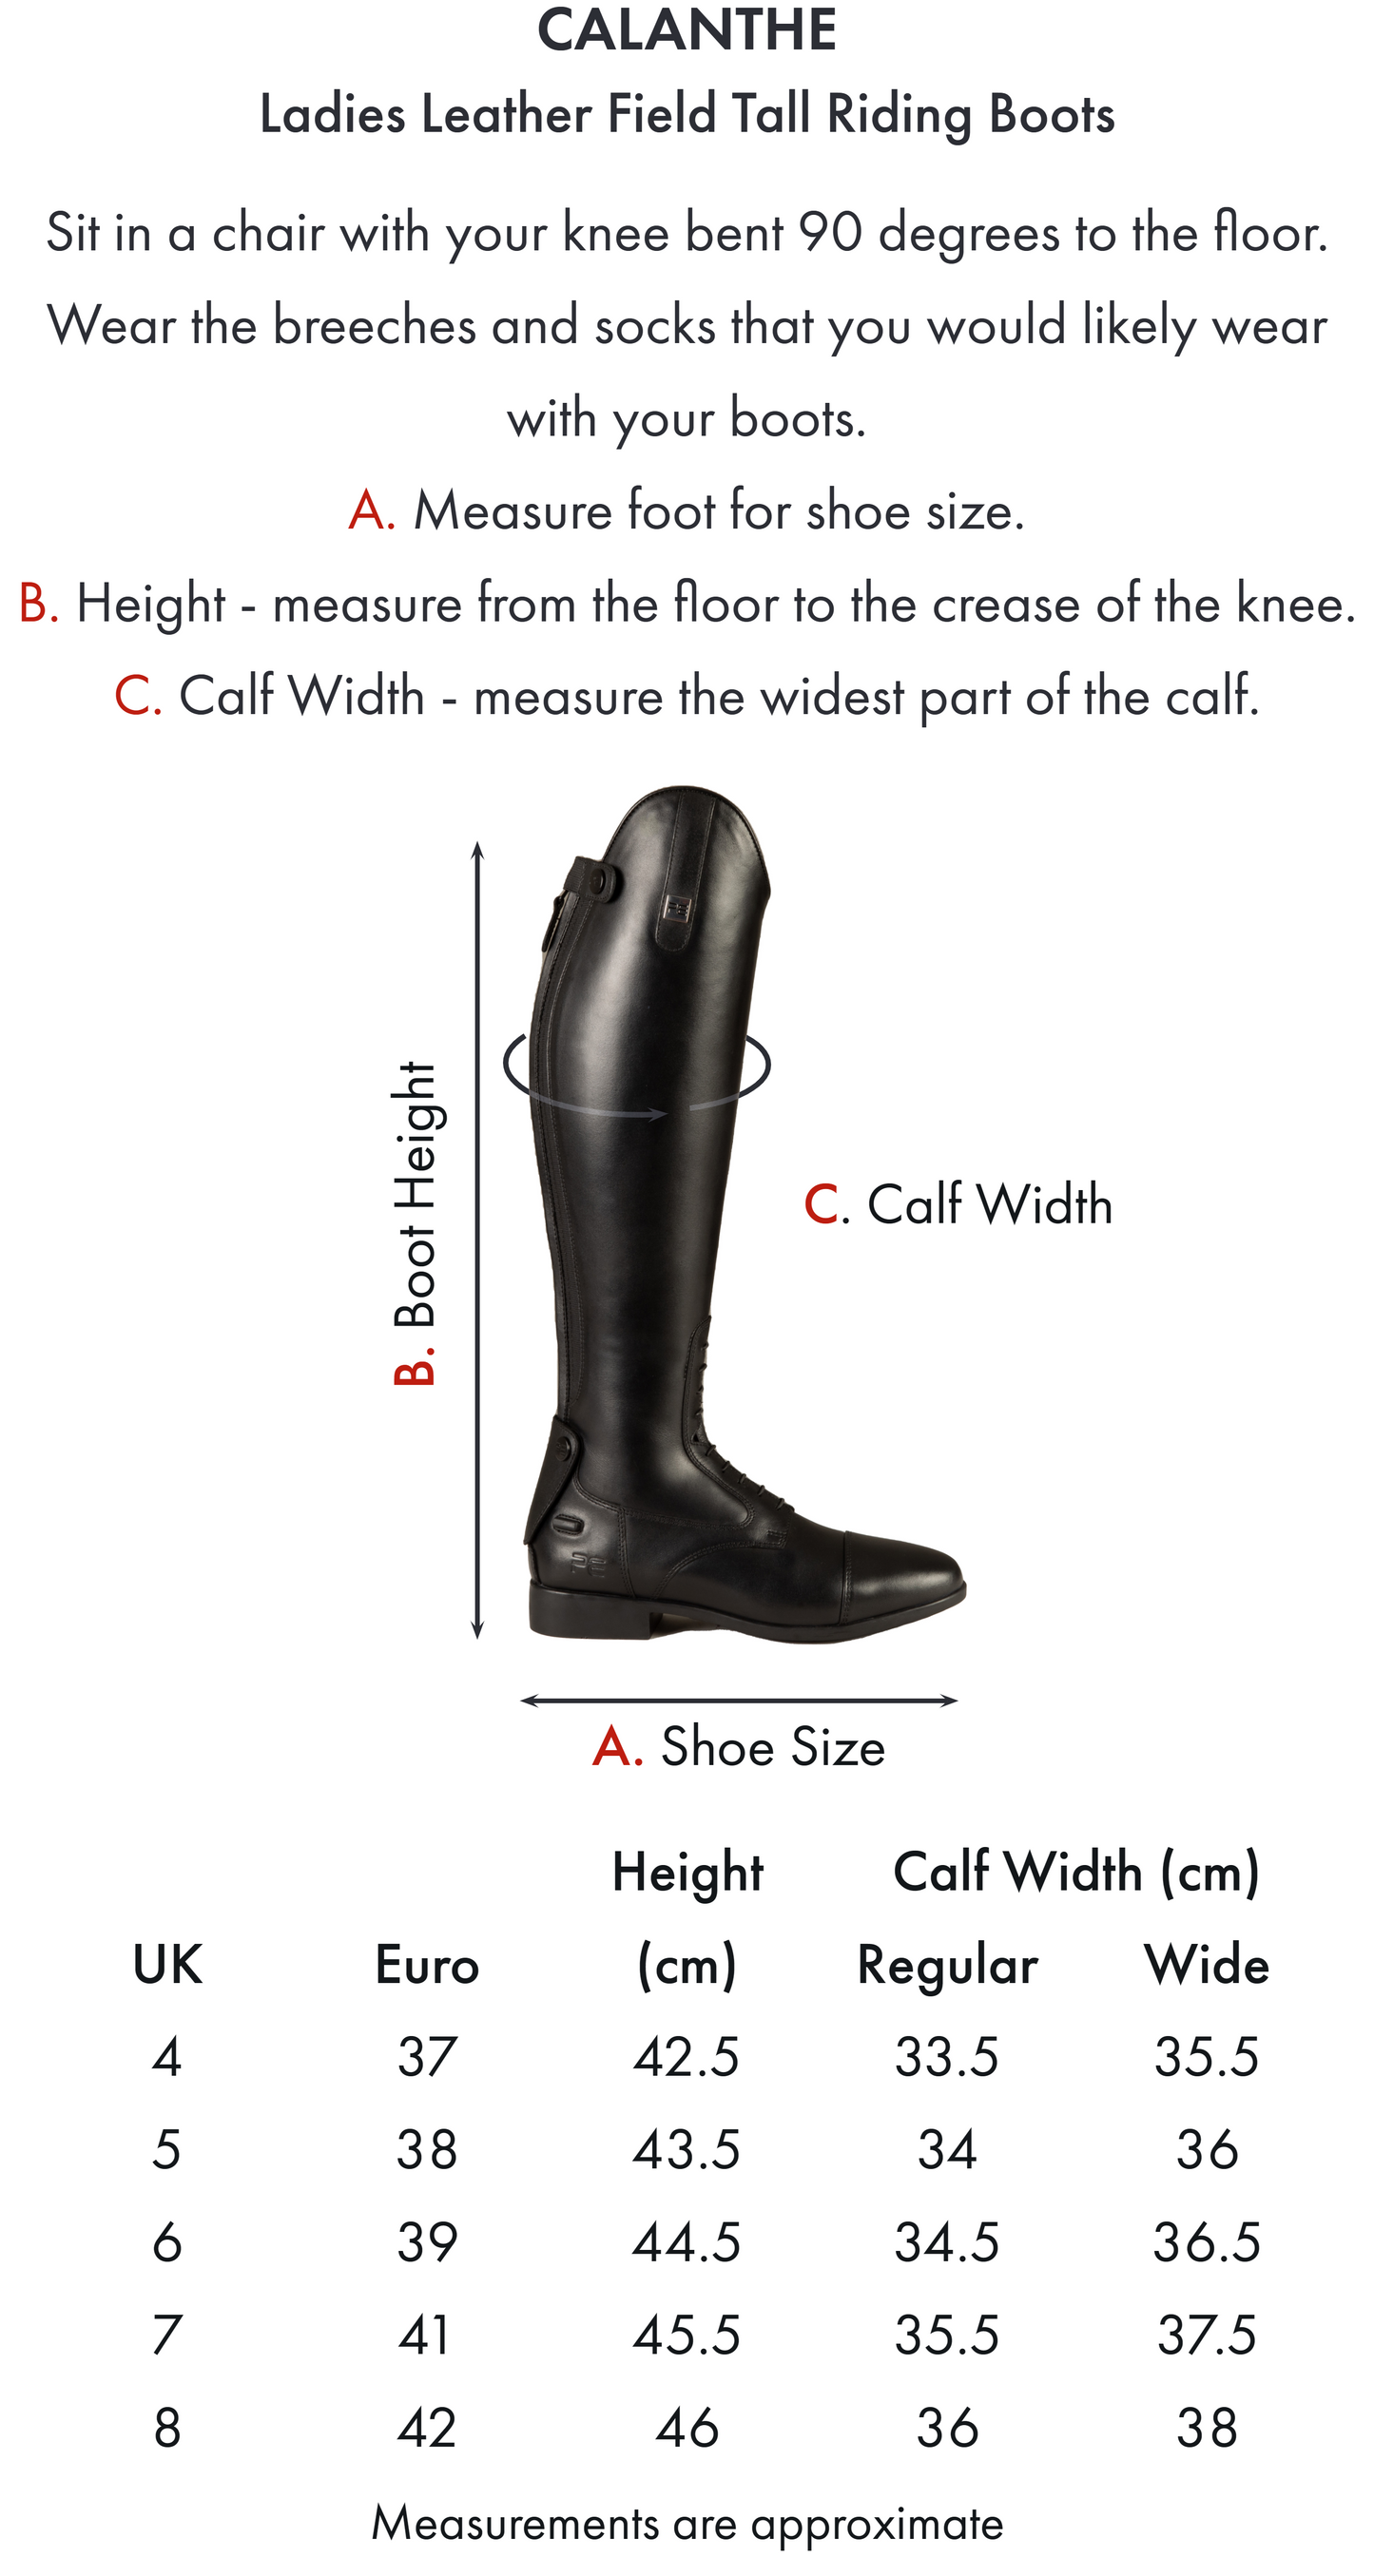 Premier Equine Calanthe leather field boots